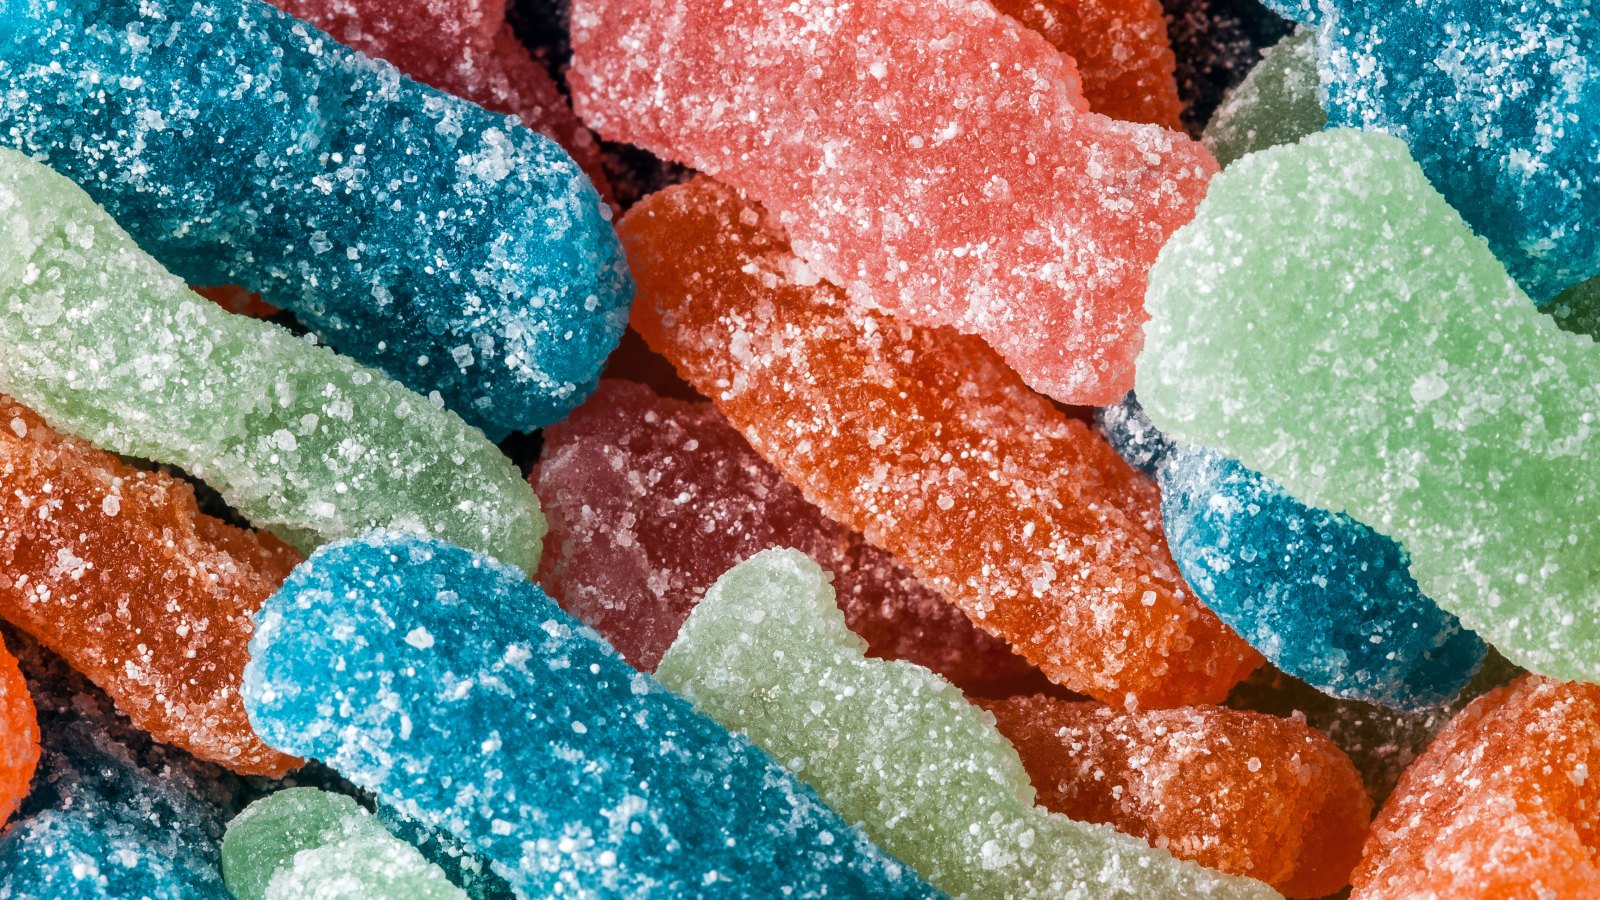 Sour Patch Kids Cereal